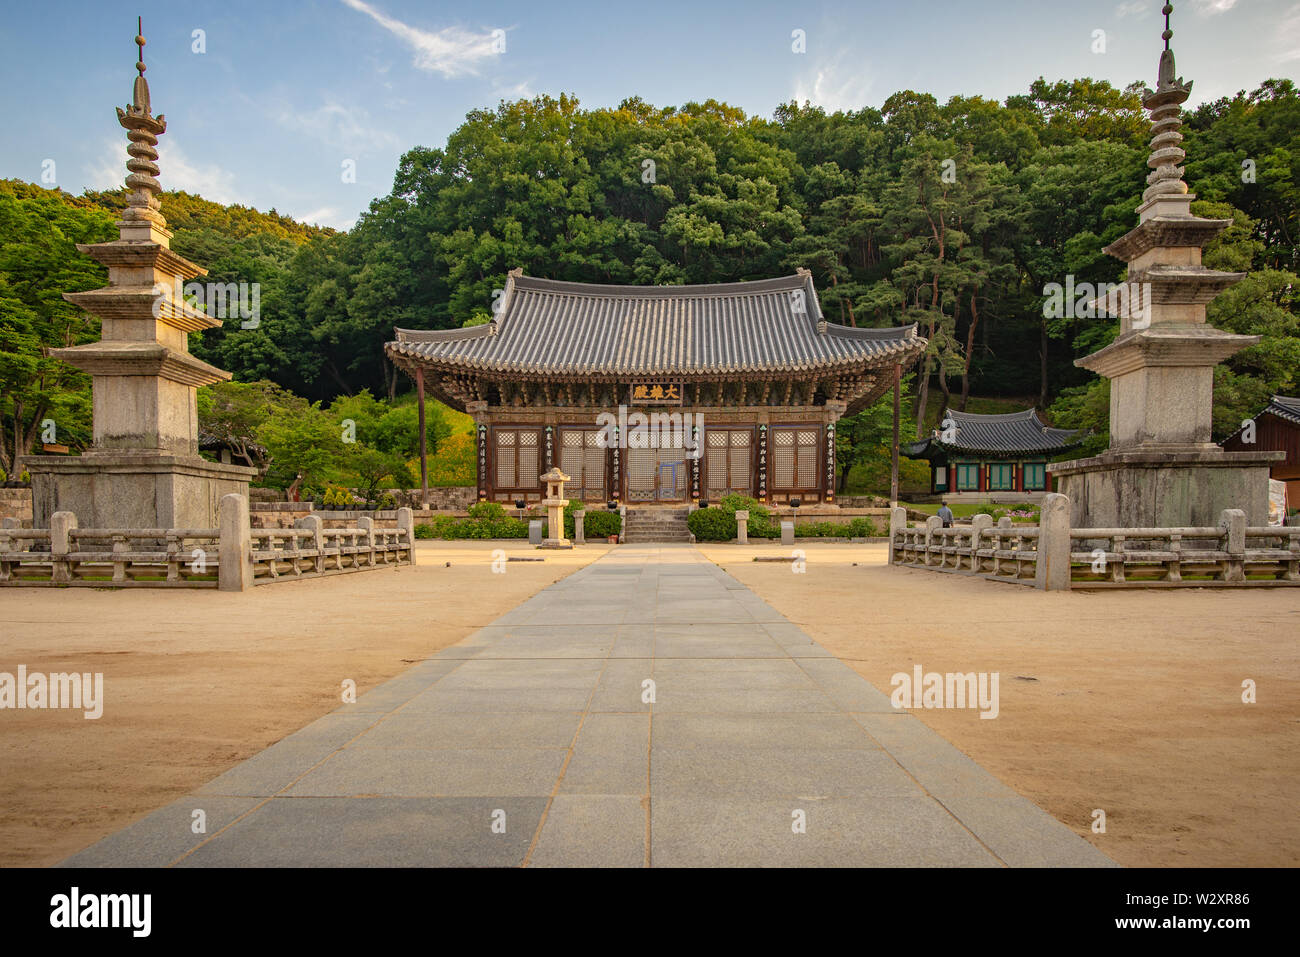 Main temple building at Jijiksa Monastery, taken during a summer afternoon, Gimcheon, South Korea Stock Photo